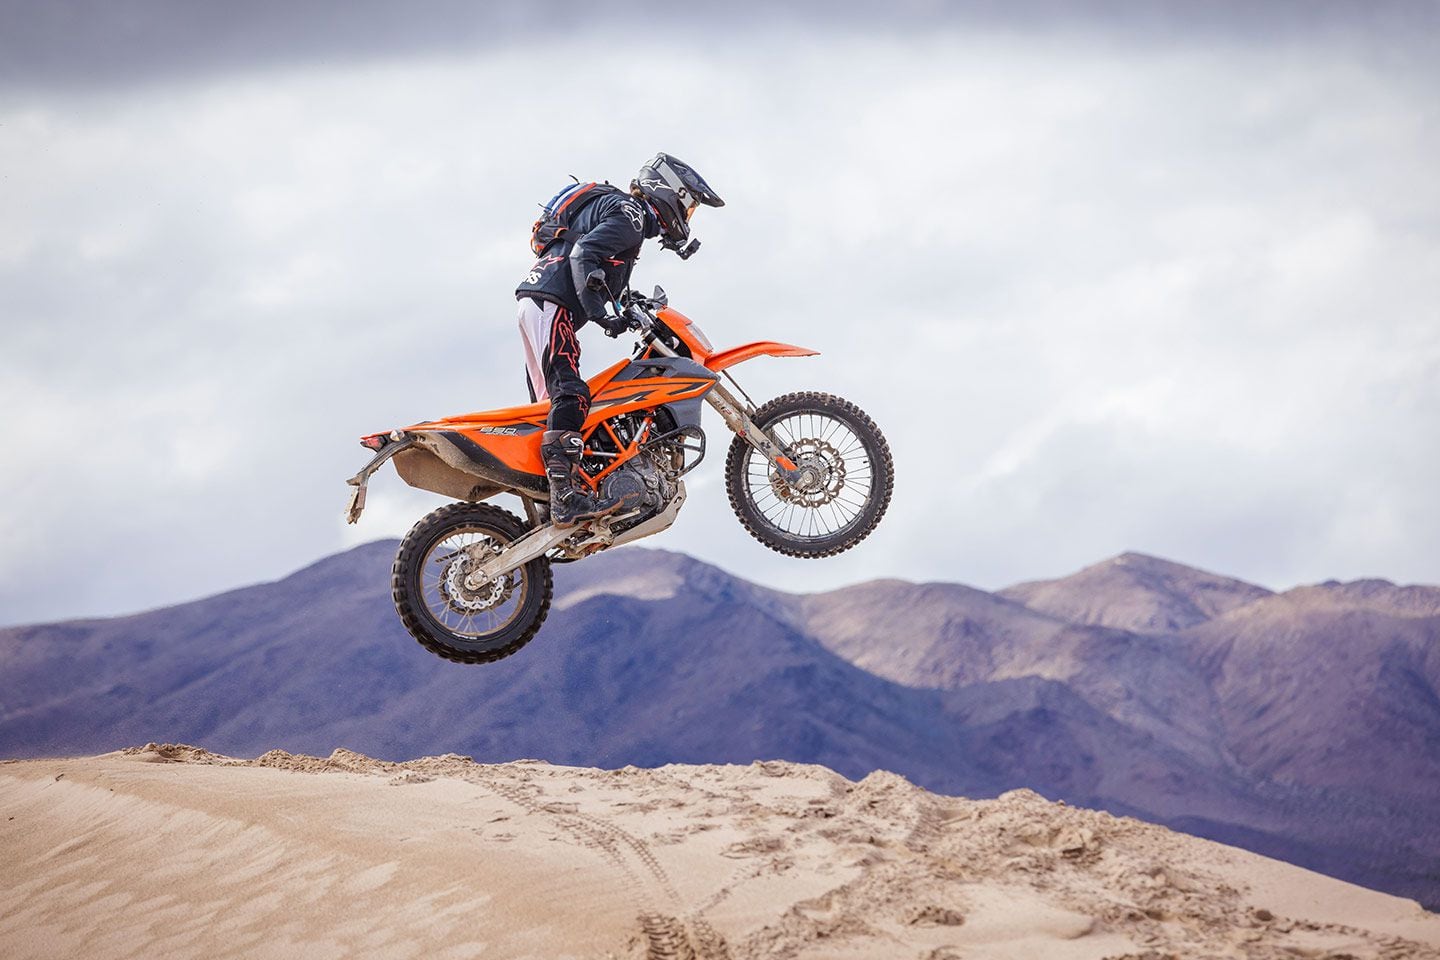 In Rally mode and Enduro mode, the Tech-Air Off-Road will not deploy on most jump landings.